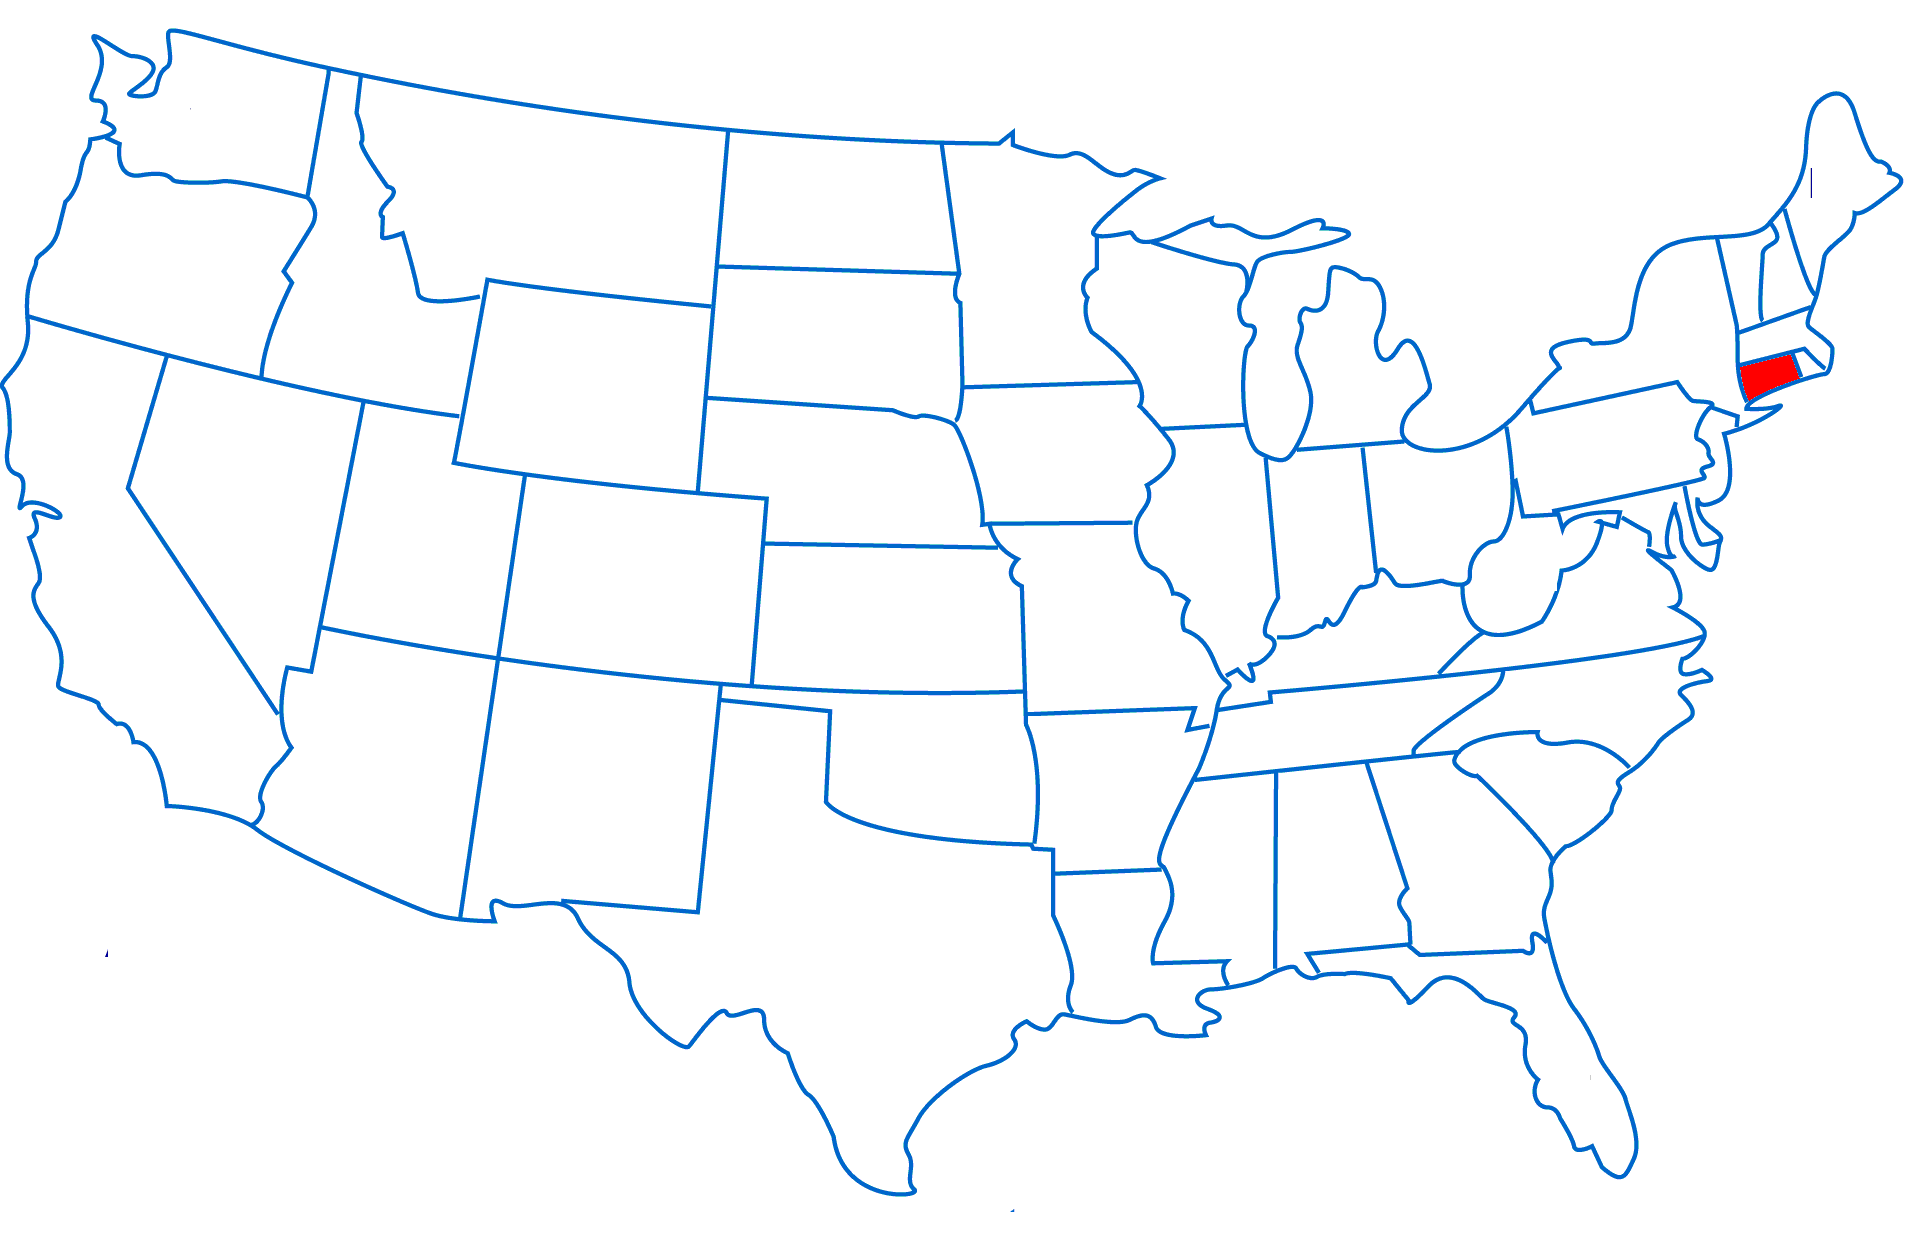 50 States Of The United States Of America - ProProfs Quiz